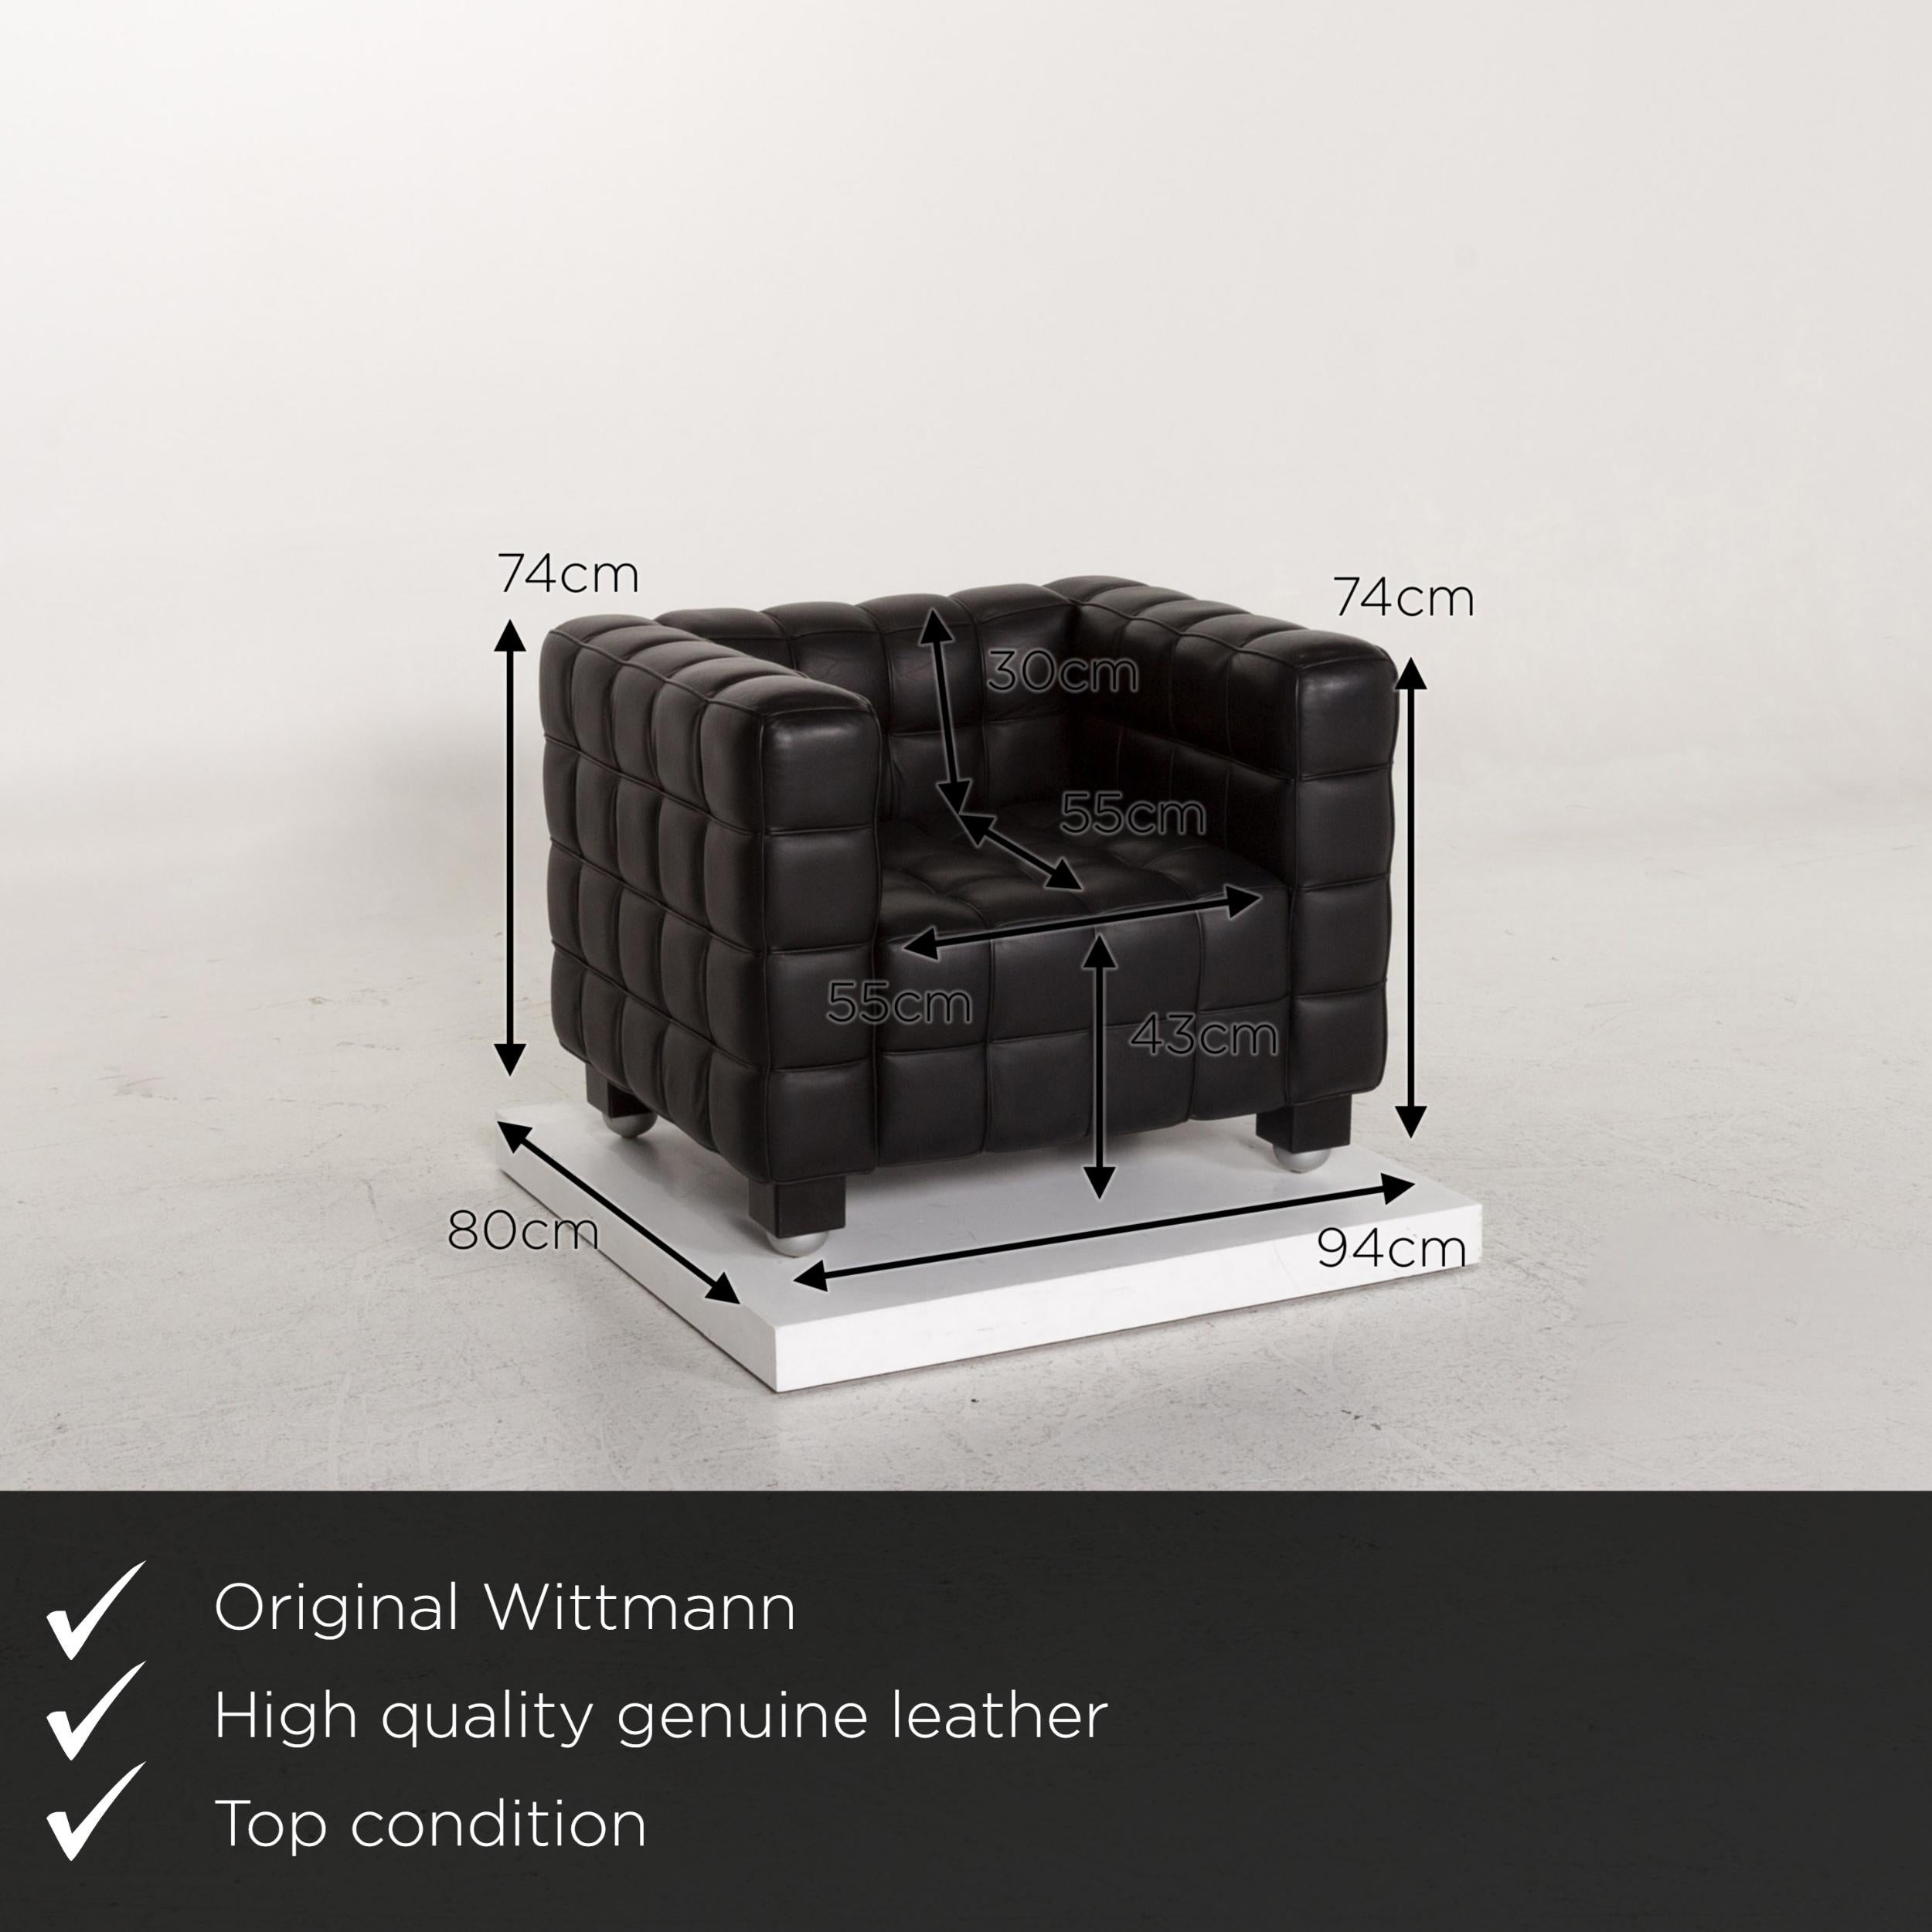 We present to you a Wittmann Kubus leather armchair black.
 
 

 Product measurements in centimeters:
 

Depth 80
Width 94
Height 74
Seat height 43
Rest height 74
Seat depth 55
Seat width 55
Back height 30.